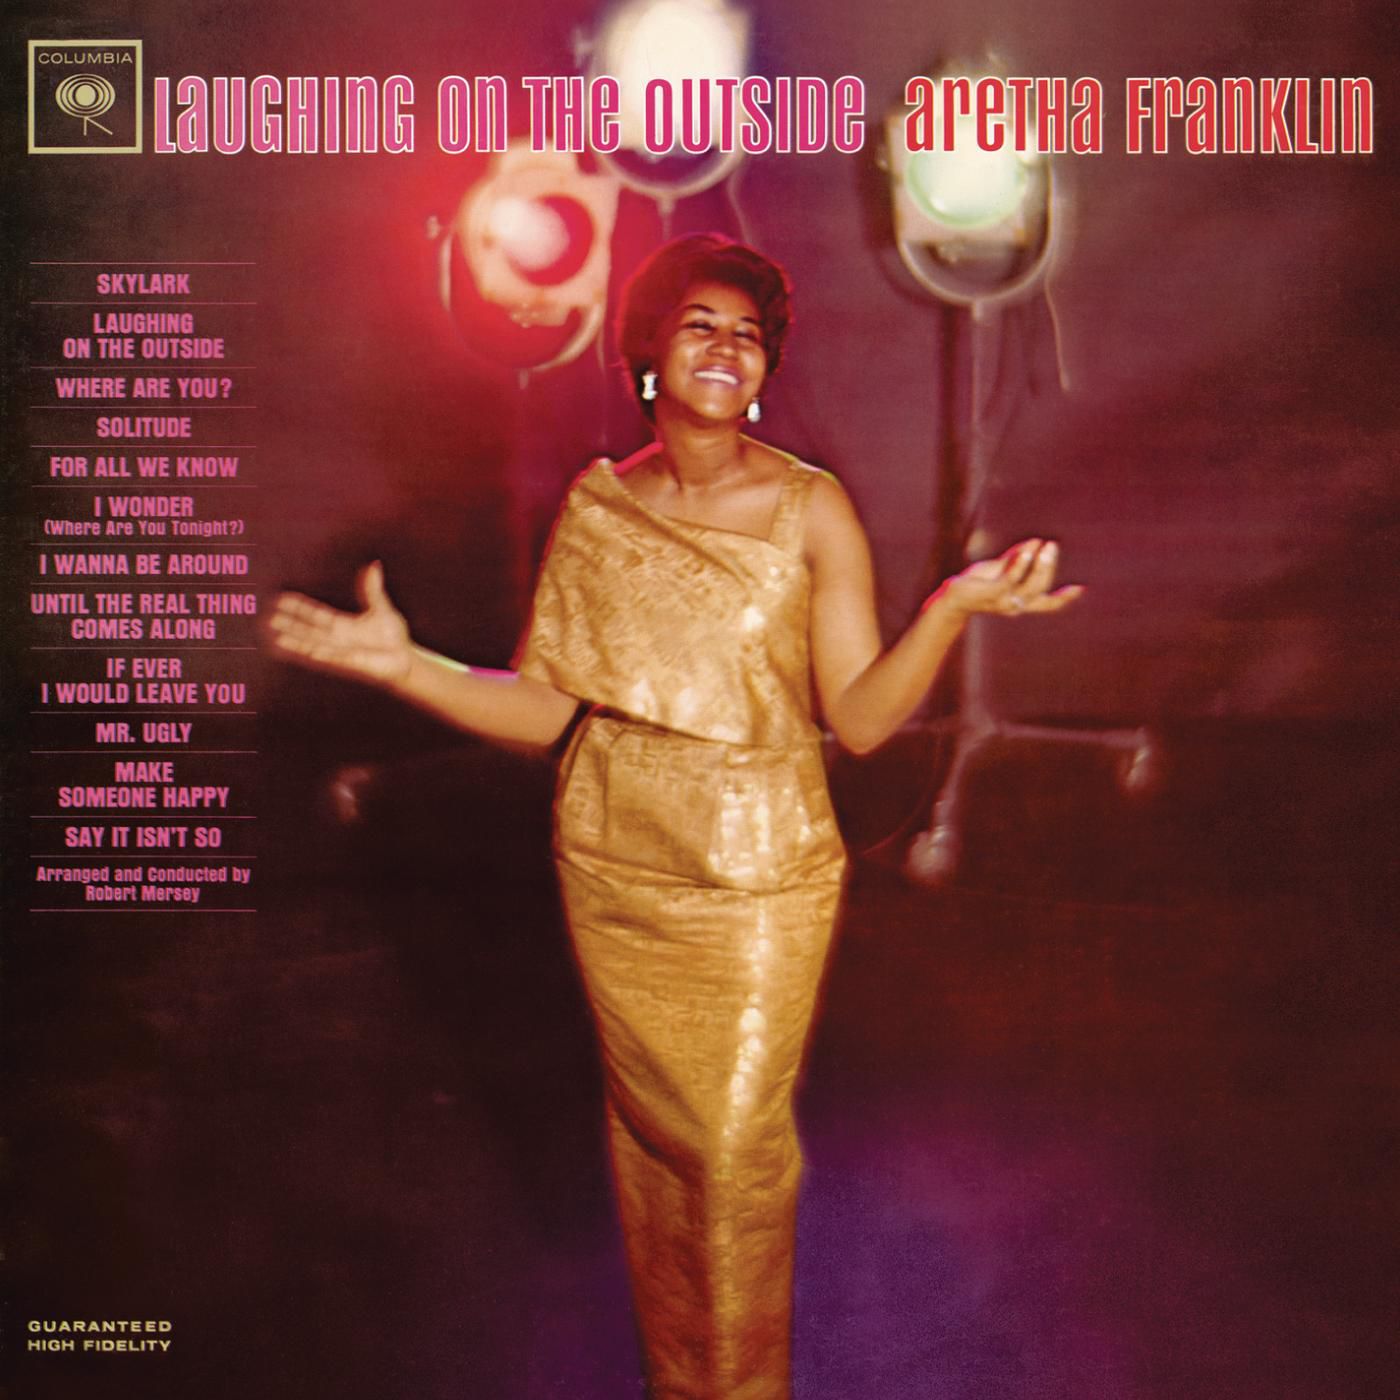 Aretha Franklin - Laughing On the Outside (Expanded Edition) (1963/2011/2017) [FLAC 24bit/96kHz]